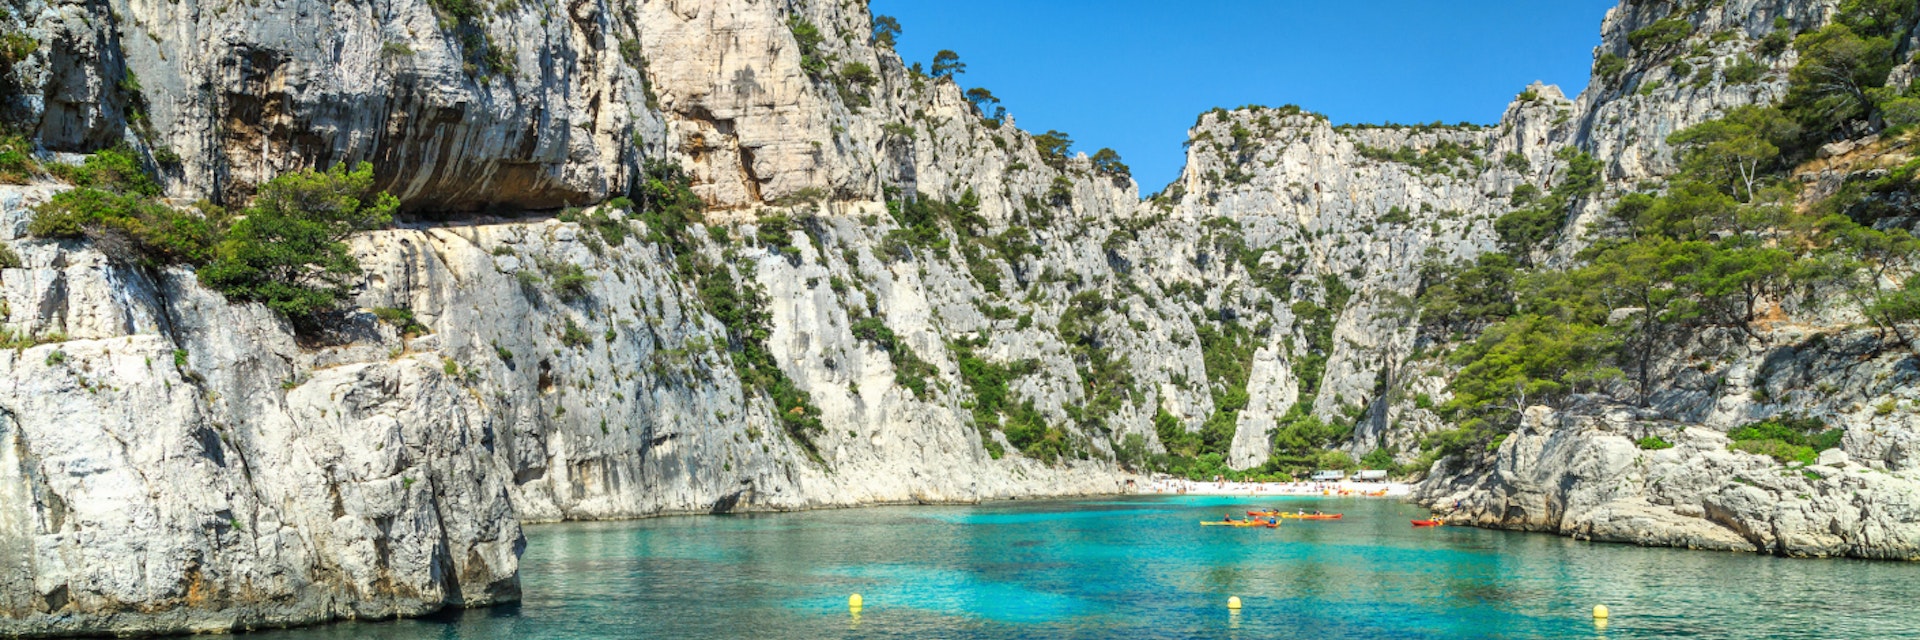 Colorful kayaks in the famous French fjords,Calanques national park, Calanque d'En Vau bay, Cassis,Marseille, Southern France, Europe; Shutterstock ID 552162244